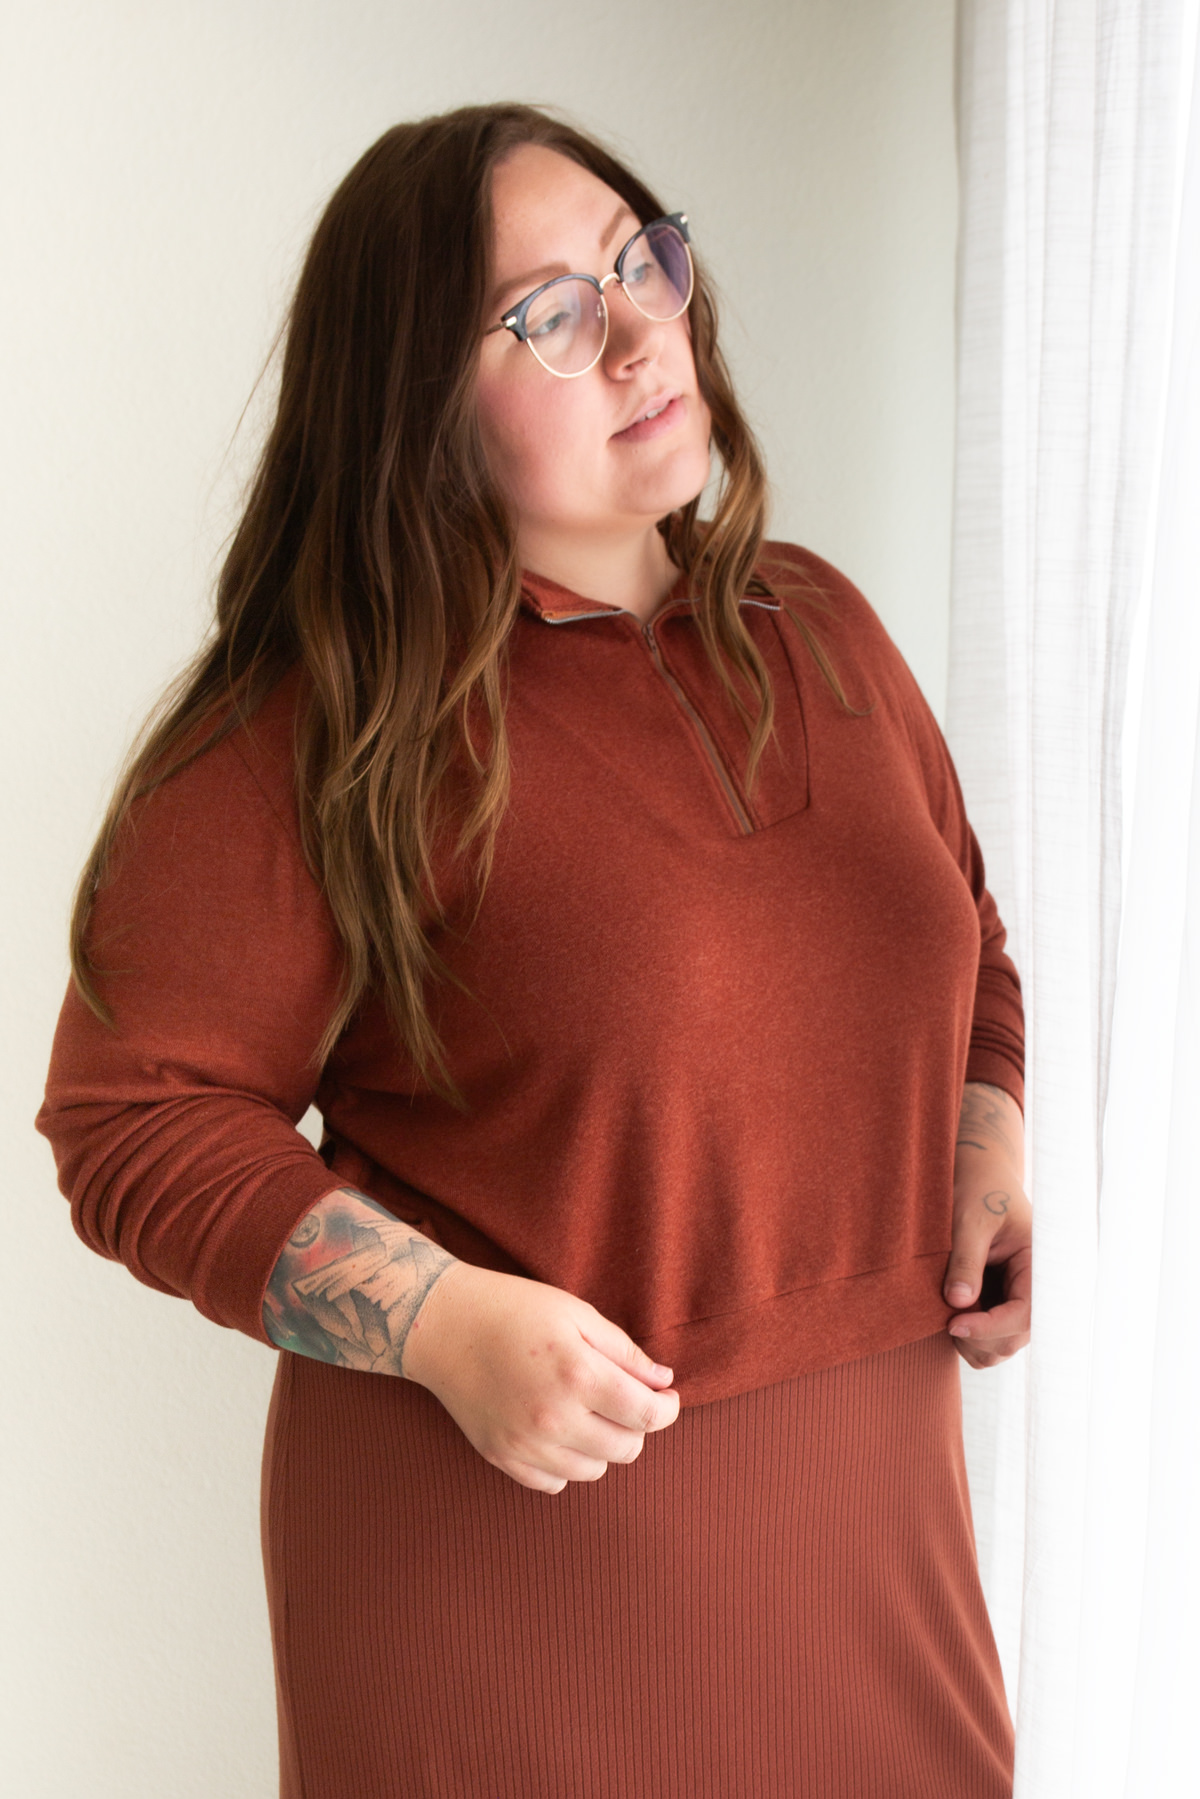 Woman wearing the Hive Pullover sewing pattern from Allie Olson on The Fold Line. A top pattern made in French terry, sweatshirt fleece, or sweater knit fabric, featuring a boxy fit, dropped shoulders, angled front yoke with a centre front zipper, cuffed sleeves, and a semi-cropped length with a waistband.